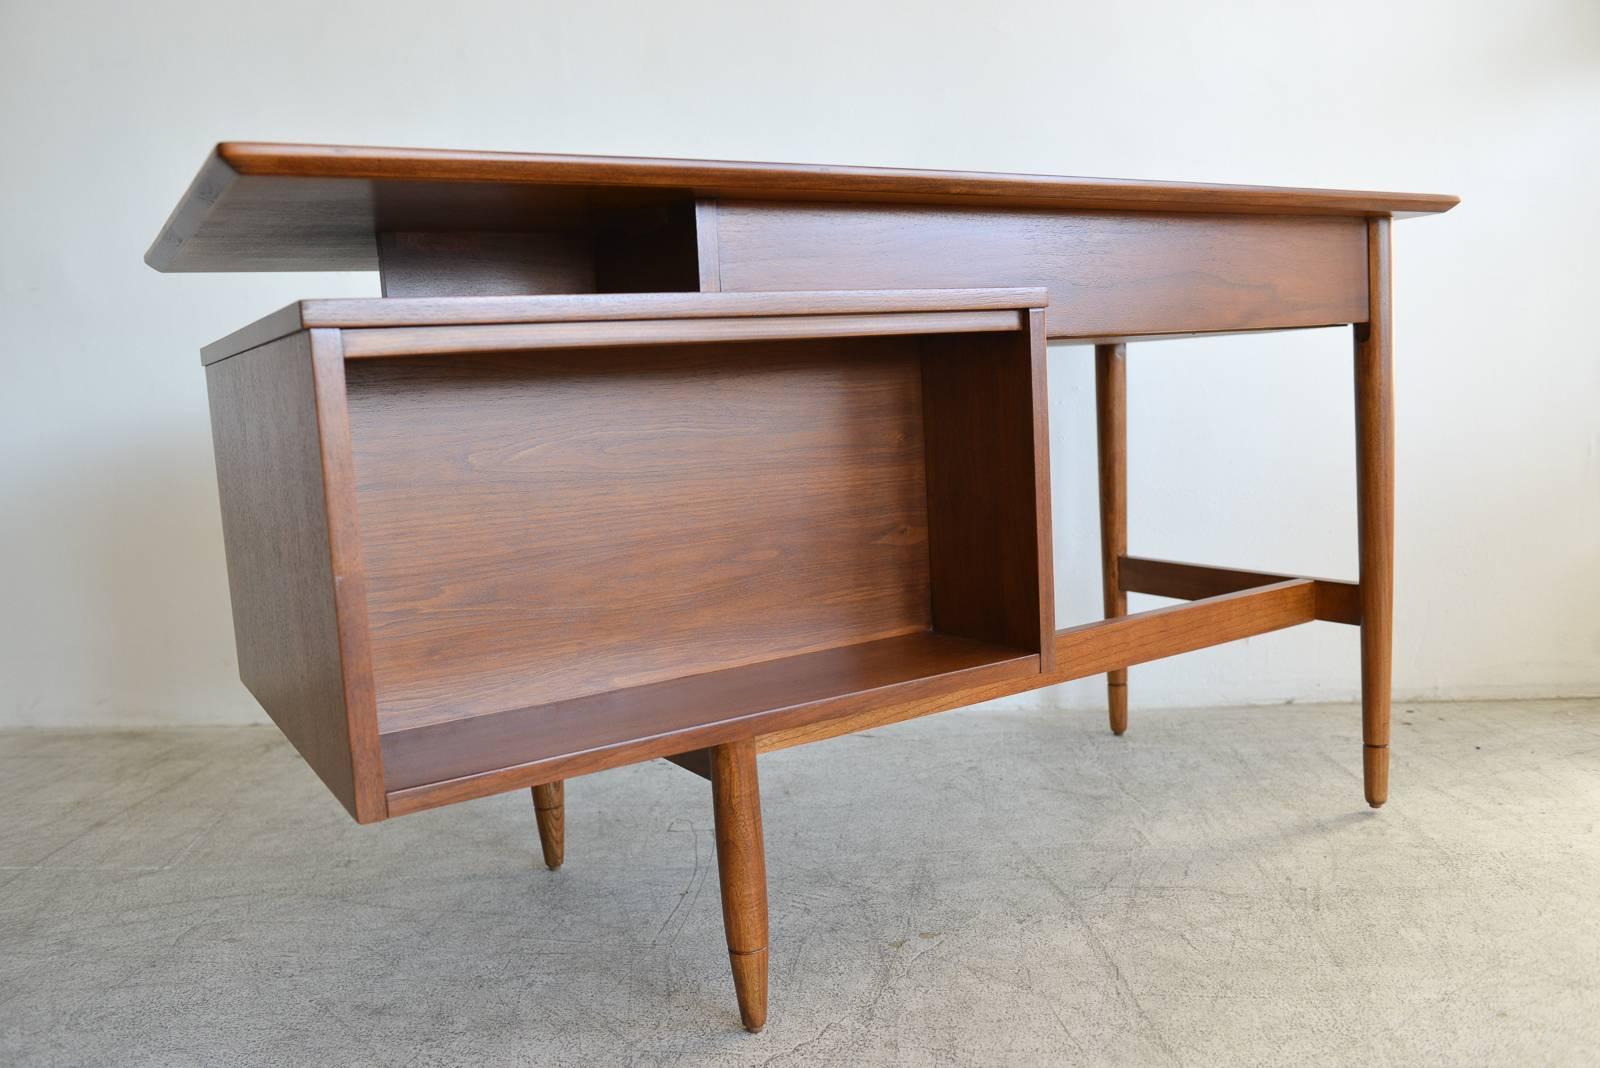 Floating top walnut desk by Hooker, circa 1965. Professionally restored in showroom perfect condition. Outer sliding door is reversible from walnut to cane. Inner sliding drawers and upper drawer for storage. Return (opposite) side is open for books